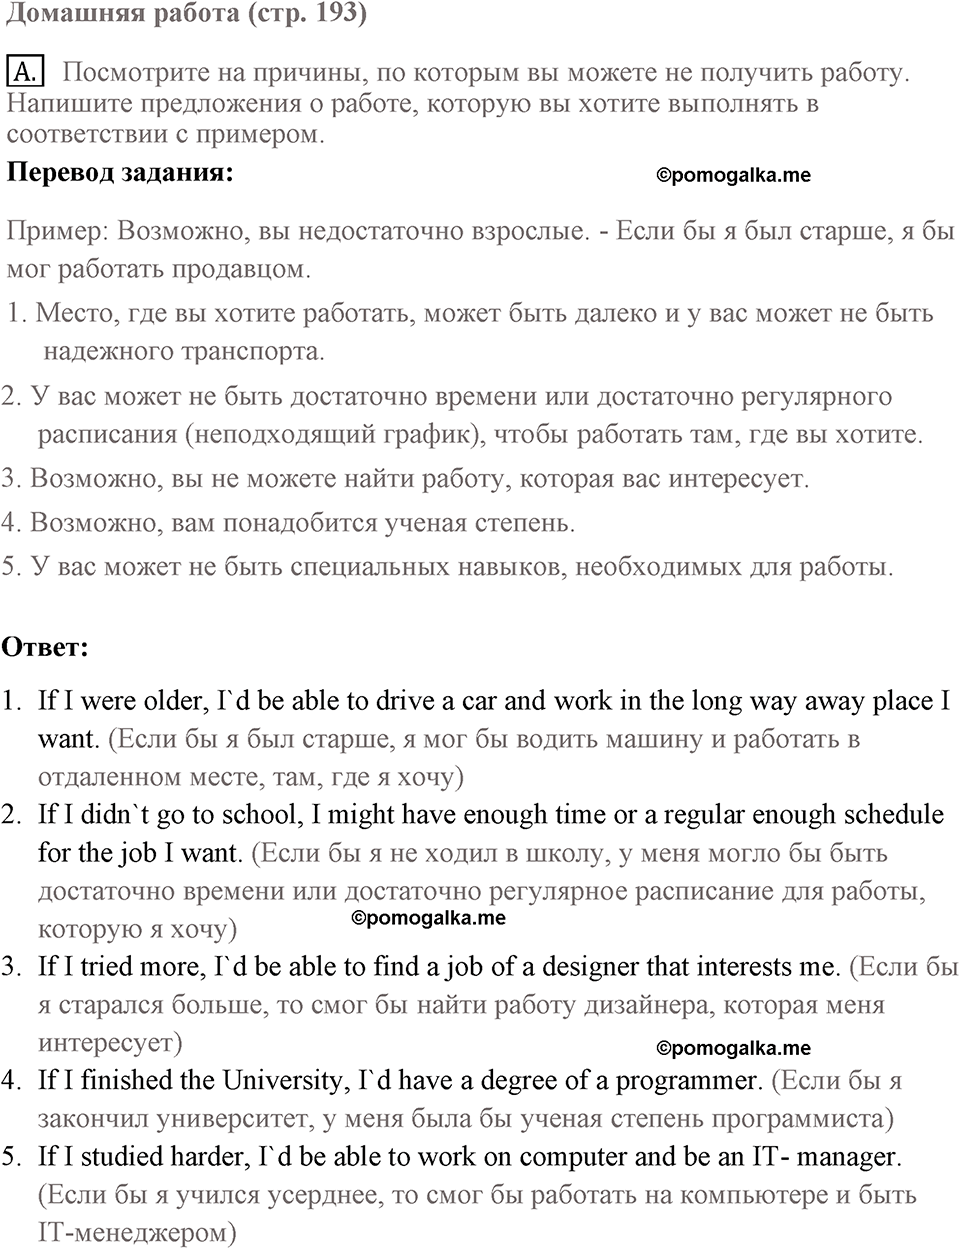 Unit 6 lesson 3-4 exercise №a английский язык 9 класс Happy English.ru